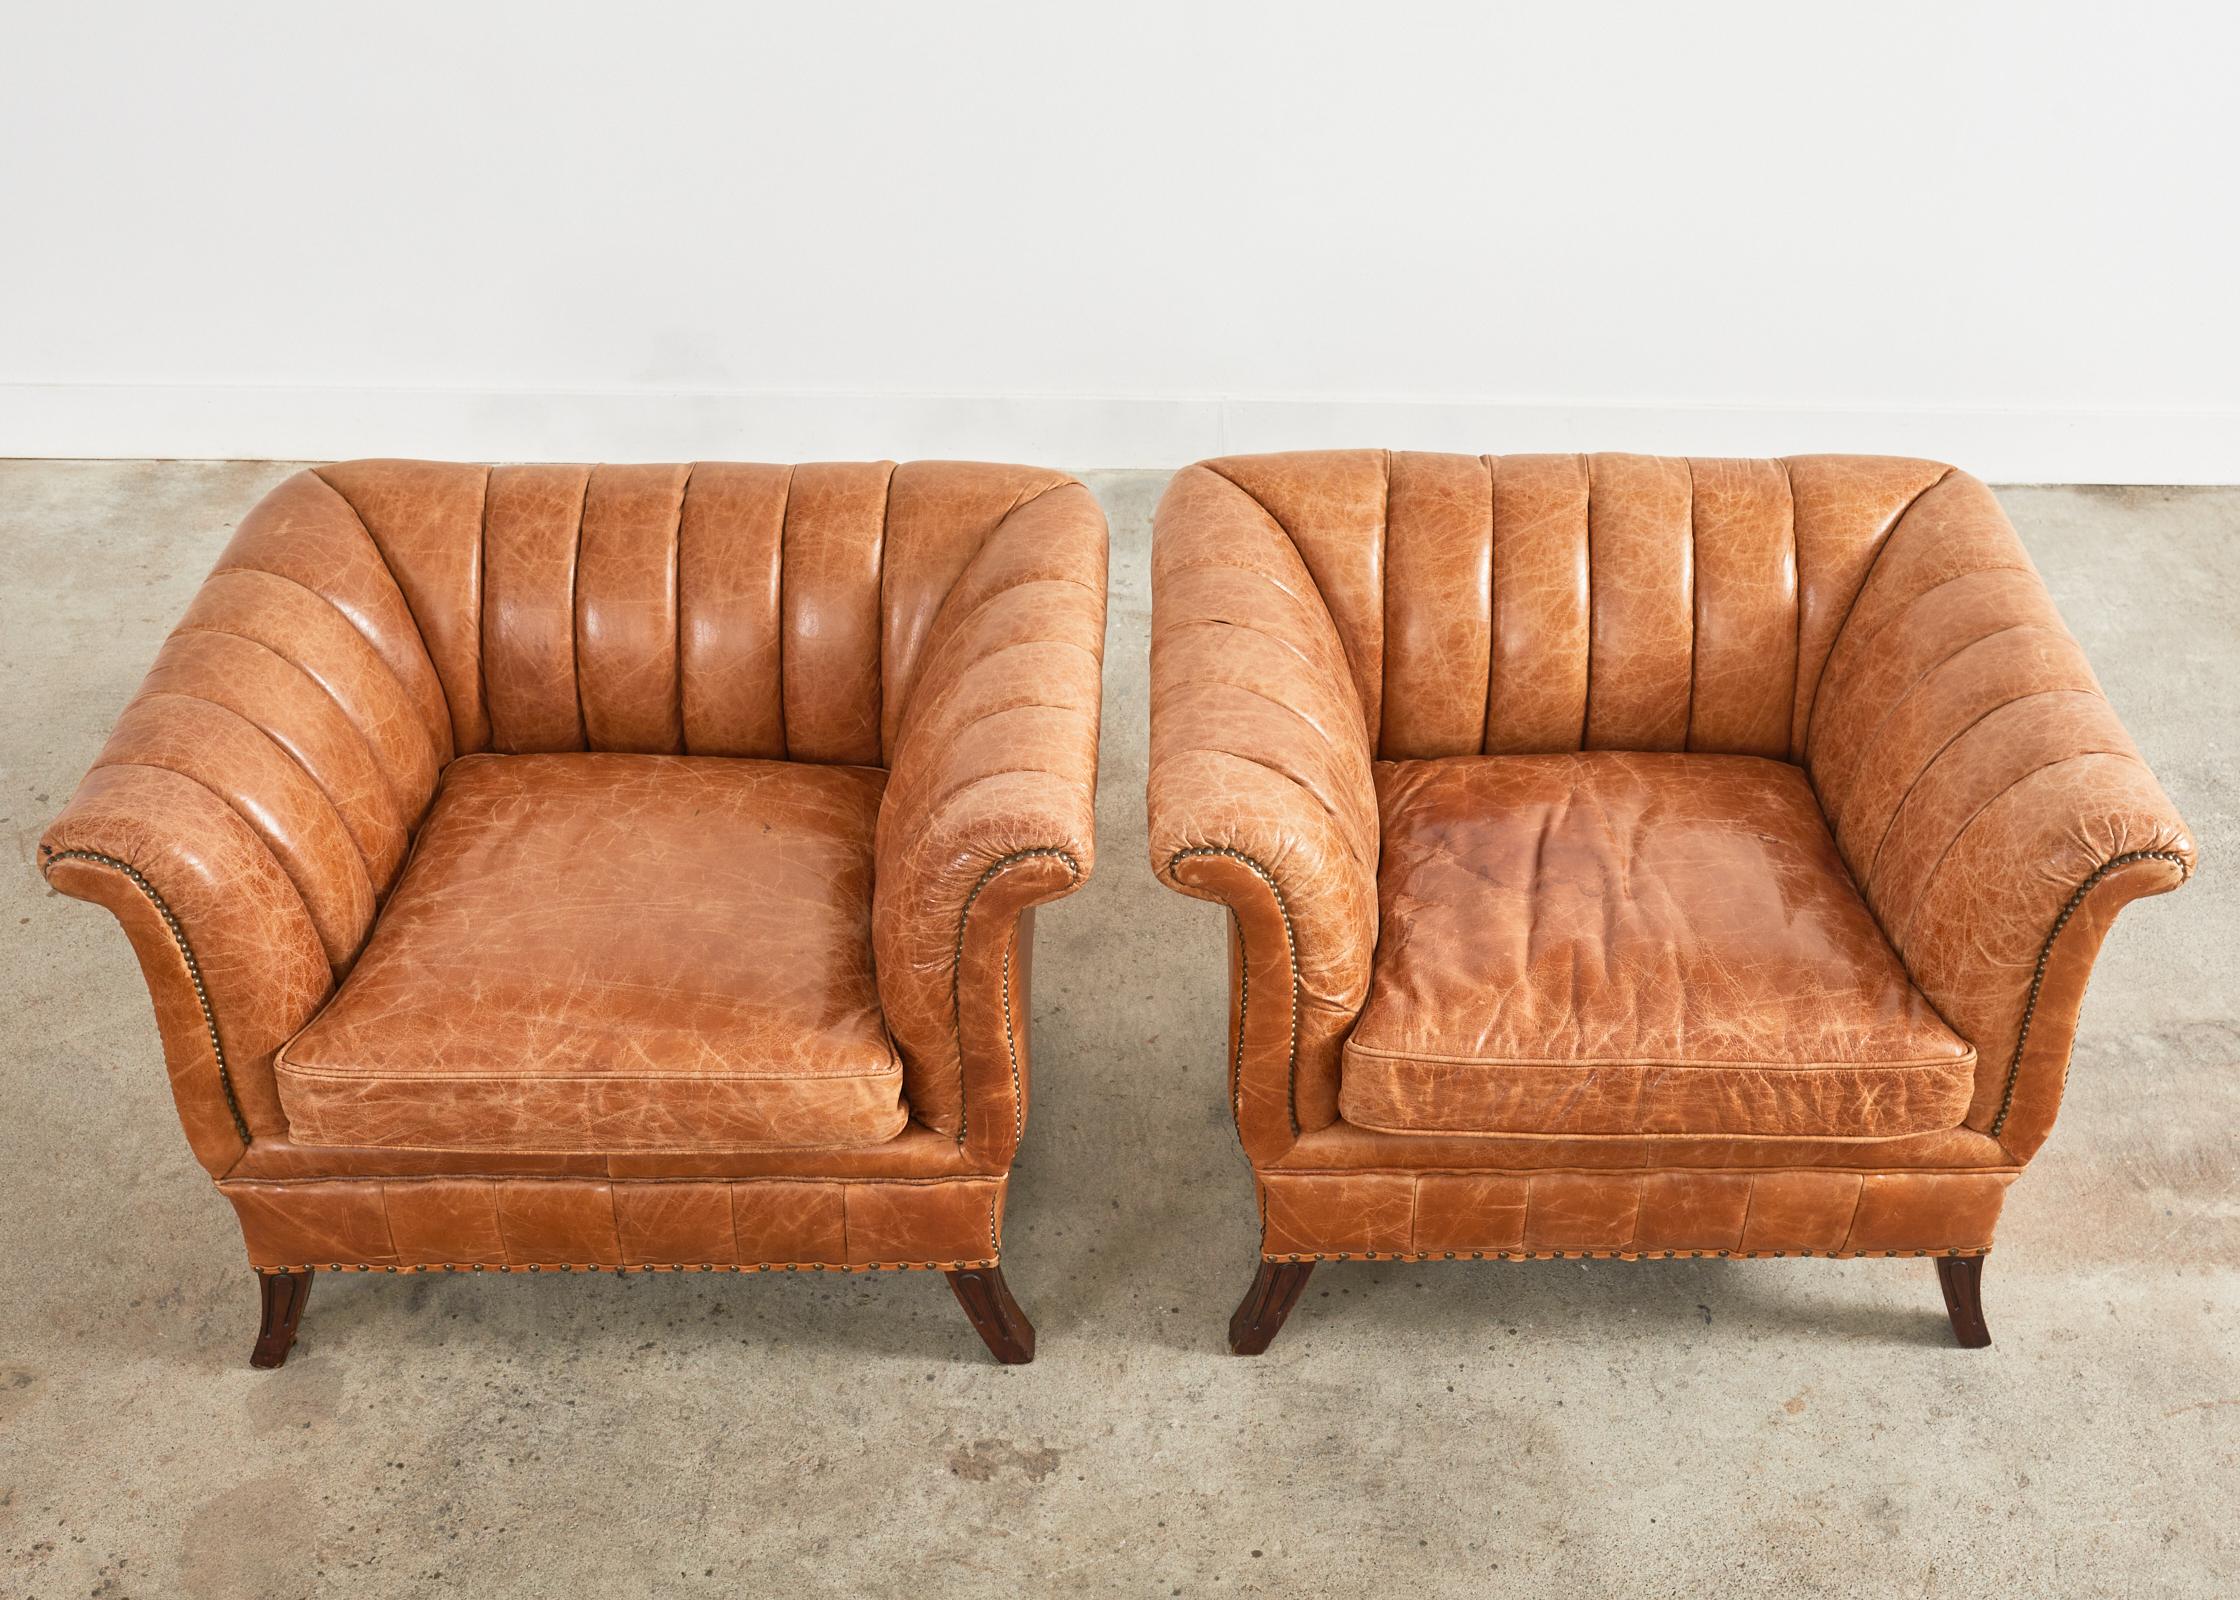 Pair of English Cigar Leather Channel Back Lounge Club Chairs In Distressed Condition In Rio Vista, CA